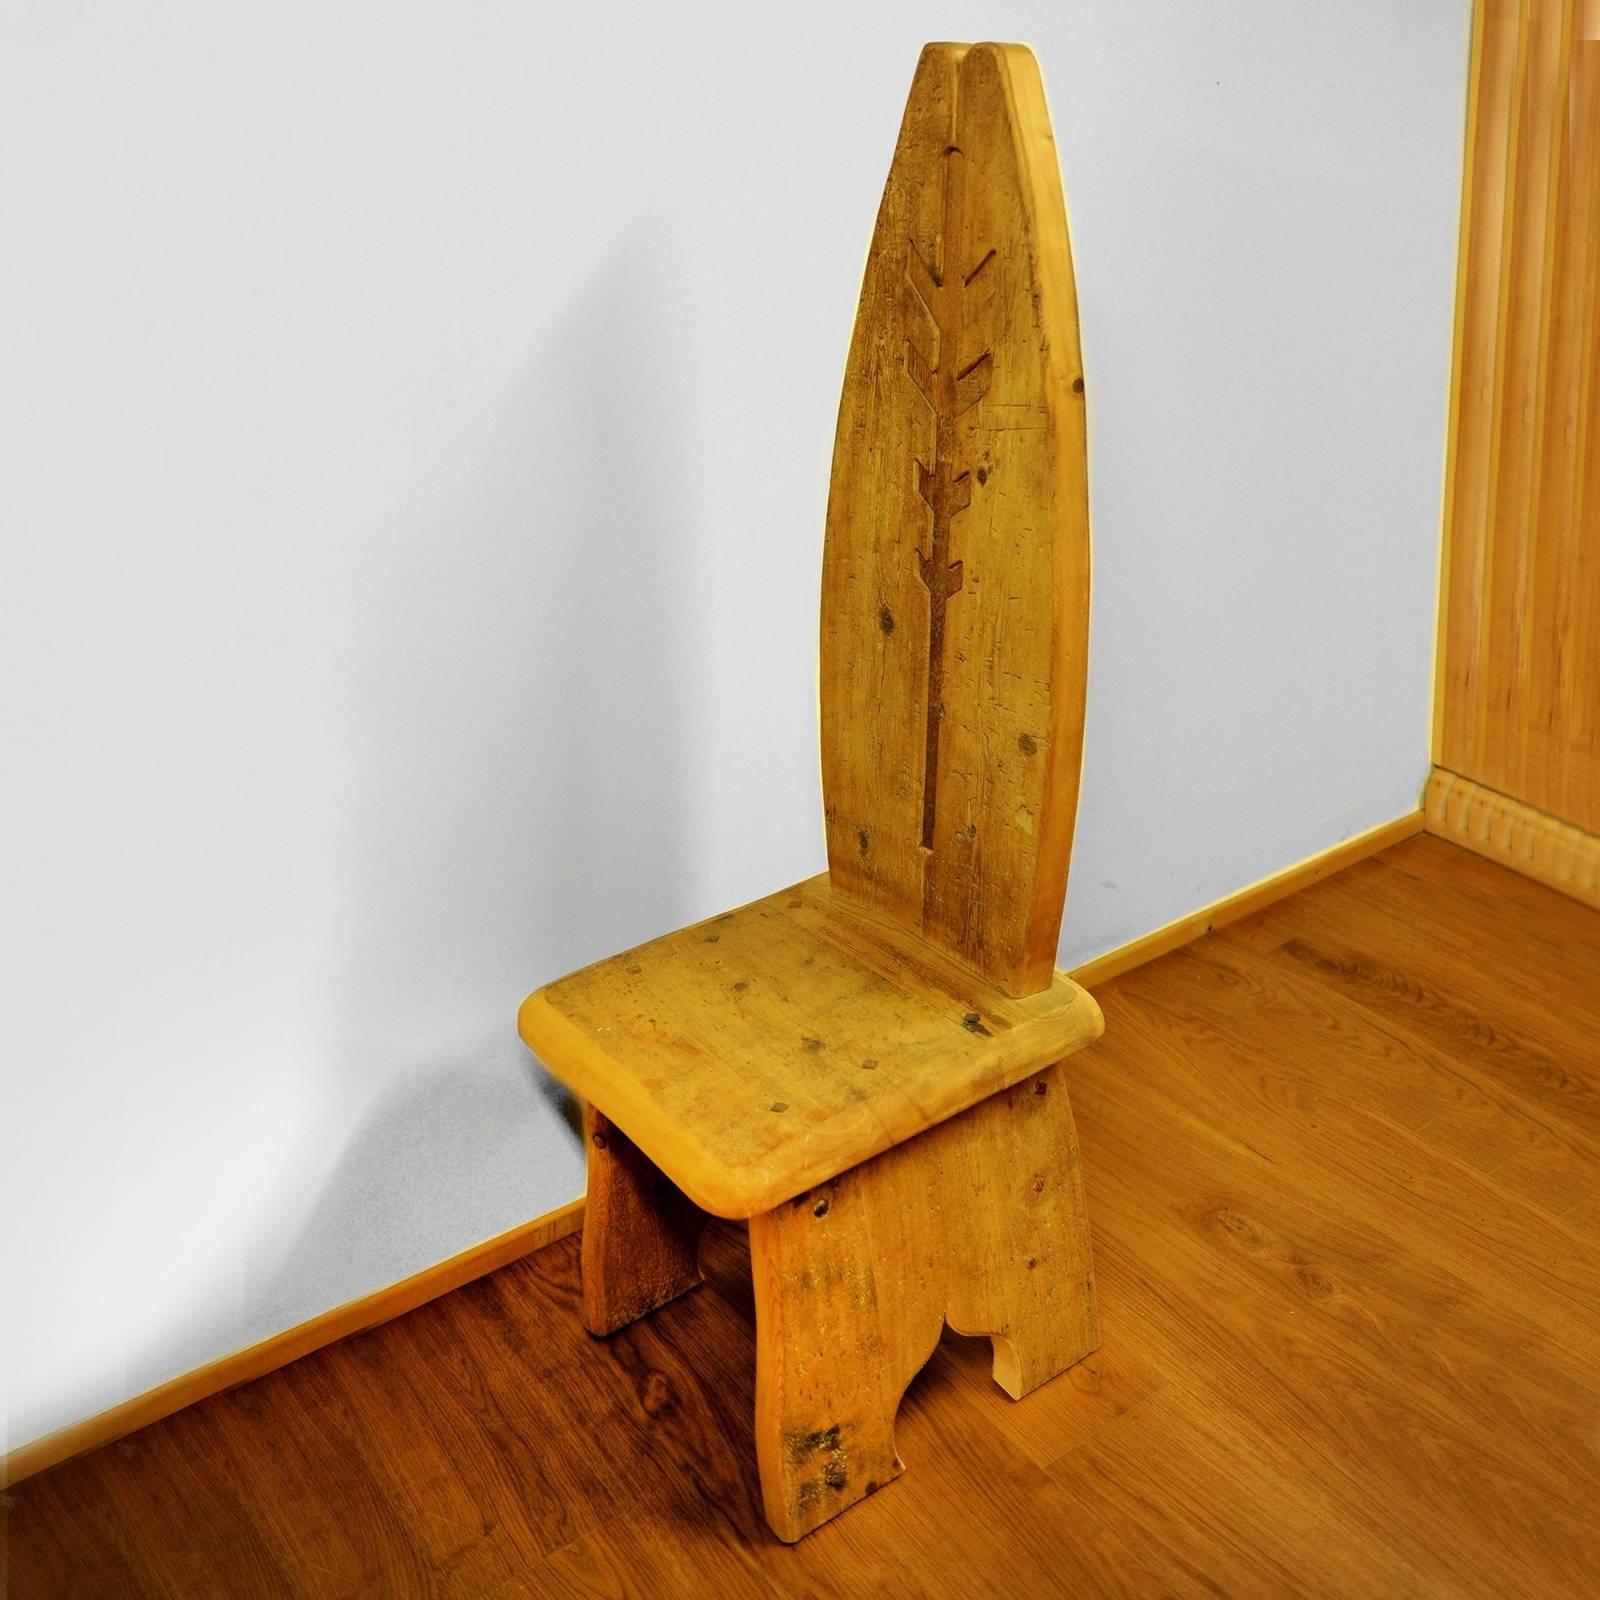 This unique chair in the shape of a superb throne was crafted of old wood used to cover the floor of 16th century-old homes. A mix of larch, pine, fir, and Swiss pine, this chair boasts one-of-a-kind signs of time that add a special texture to the